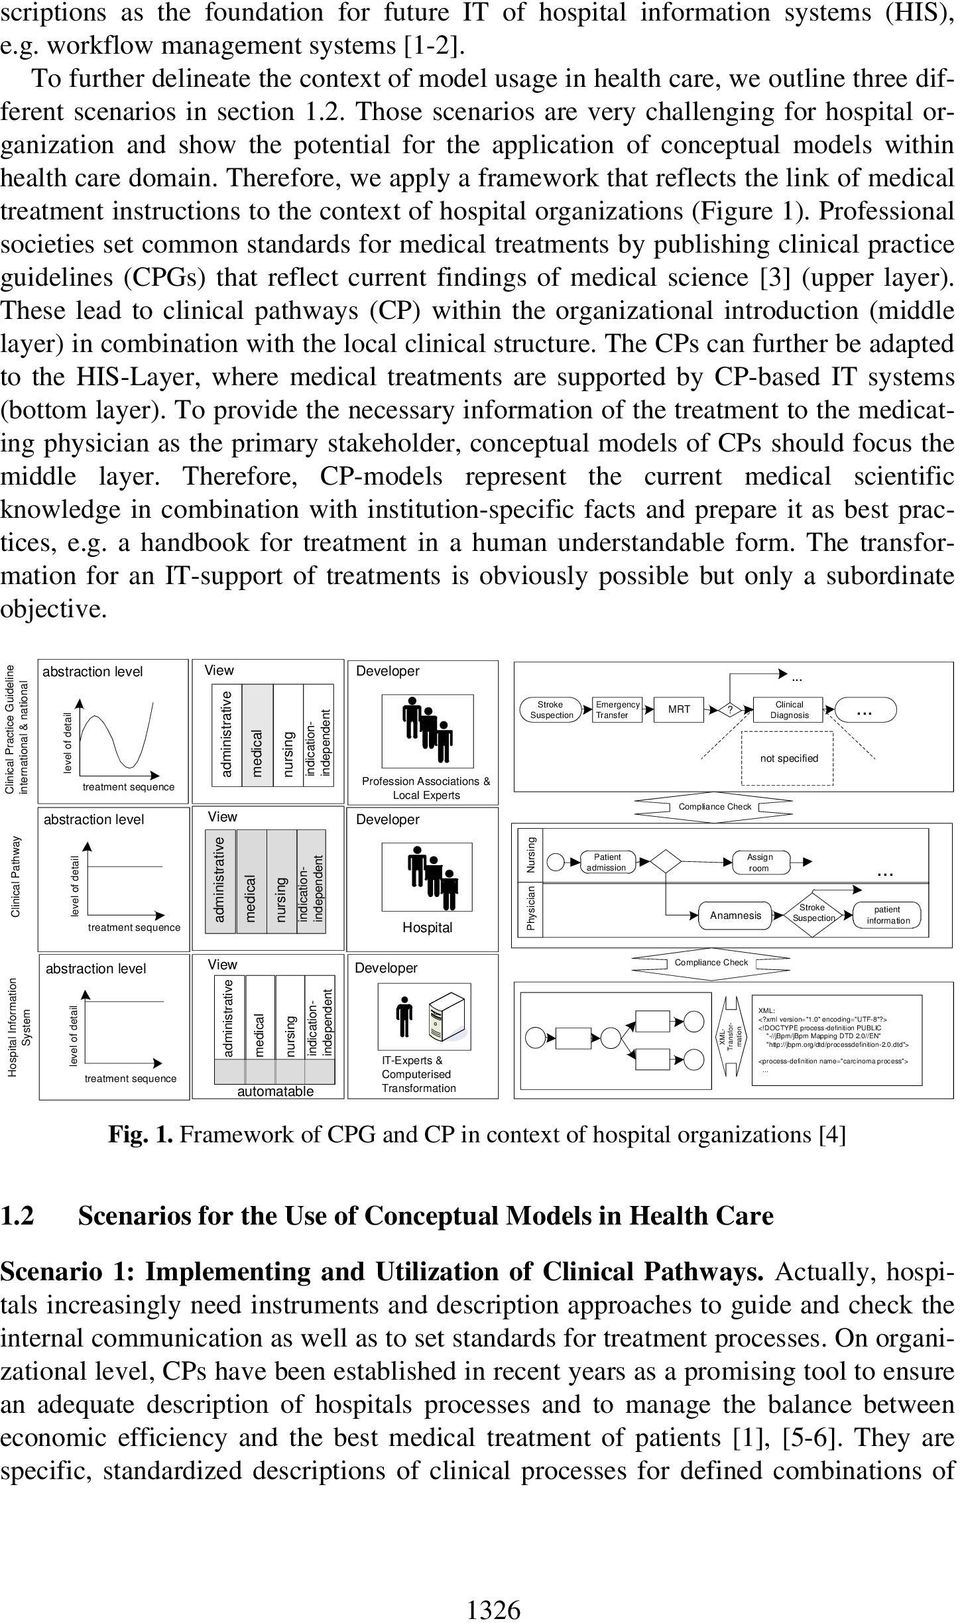 Those scenarios are very challenging for hospital organization and show the potential for the application of conceptual models within health care domain.